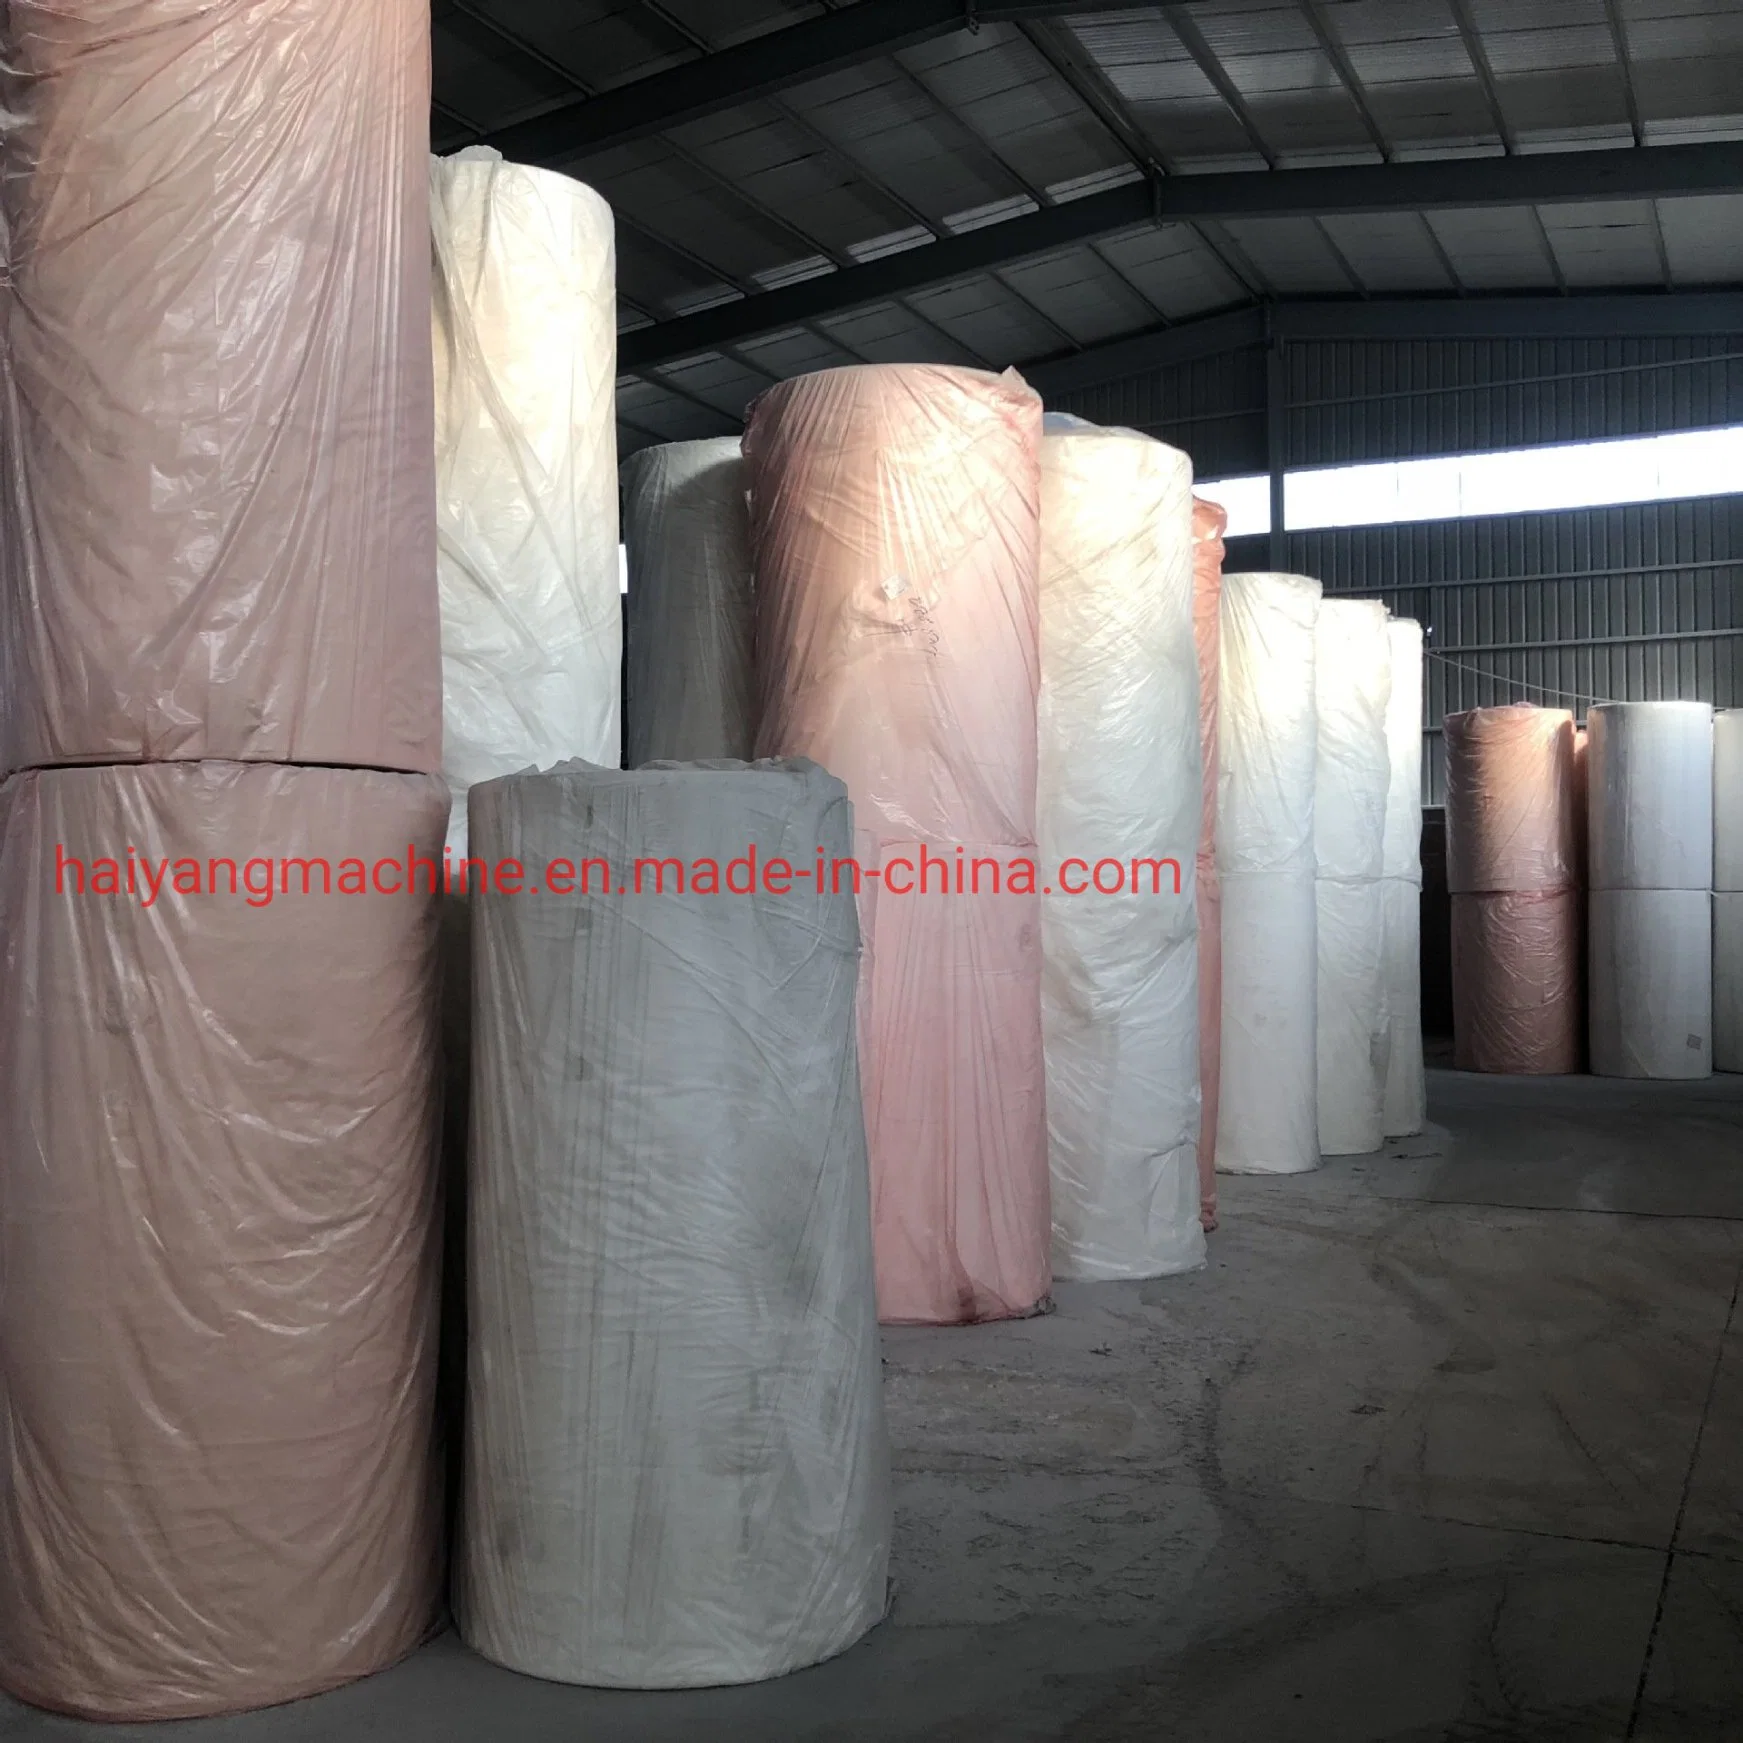 Raw Material for Making Toilet/ Paper Rolls/ Toilet Paper Business for Sale